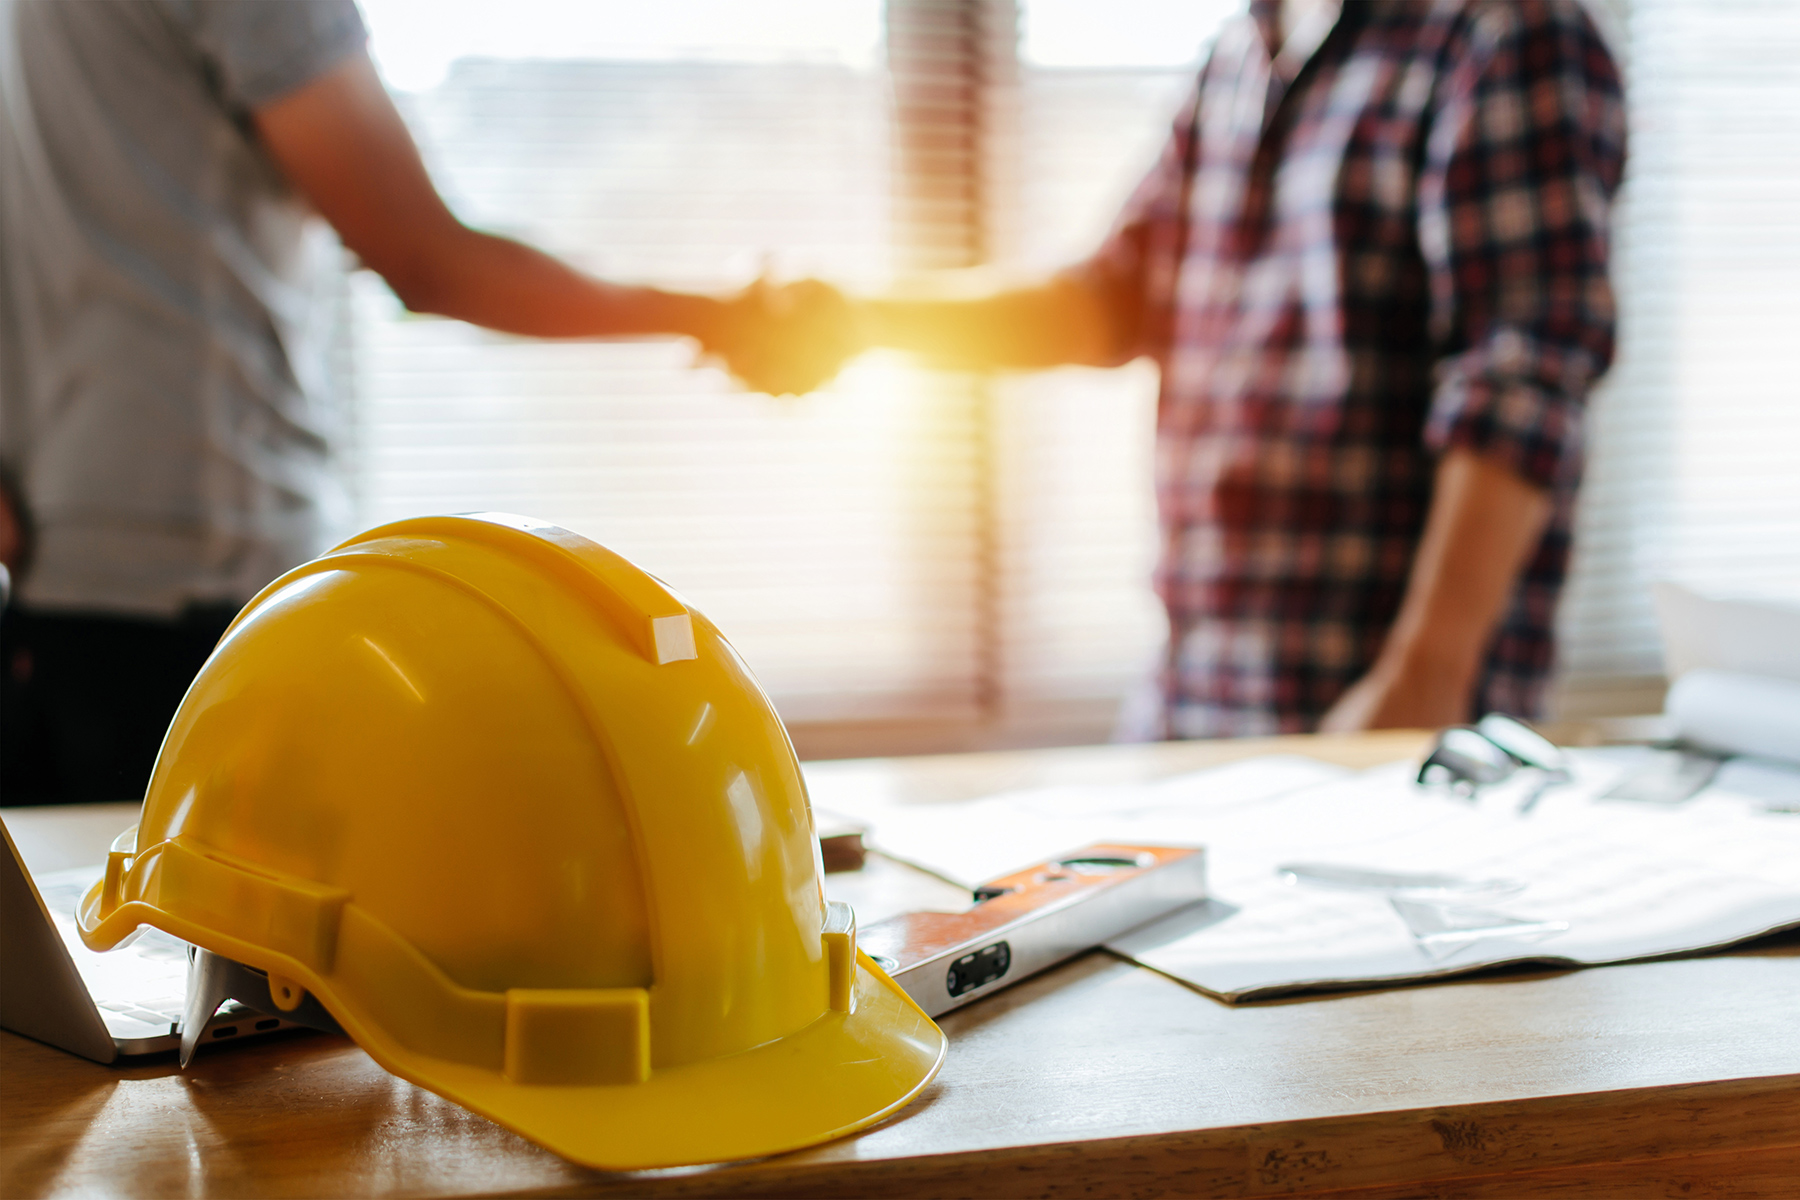 Close up of a hard hat on a table and two people shaking hands in the background